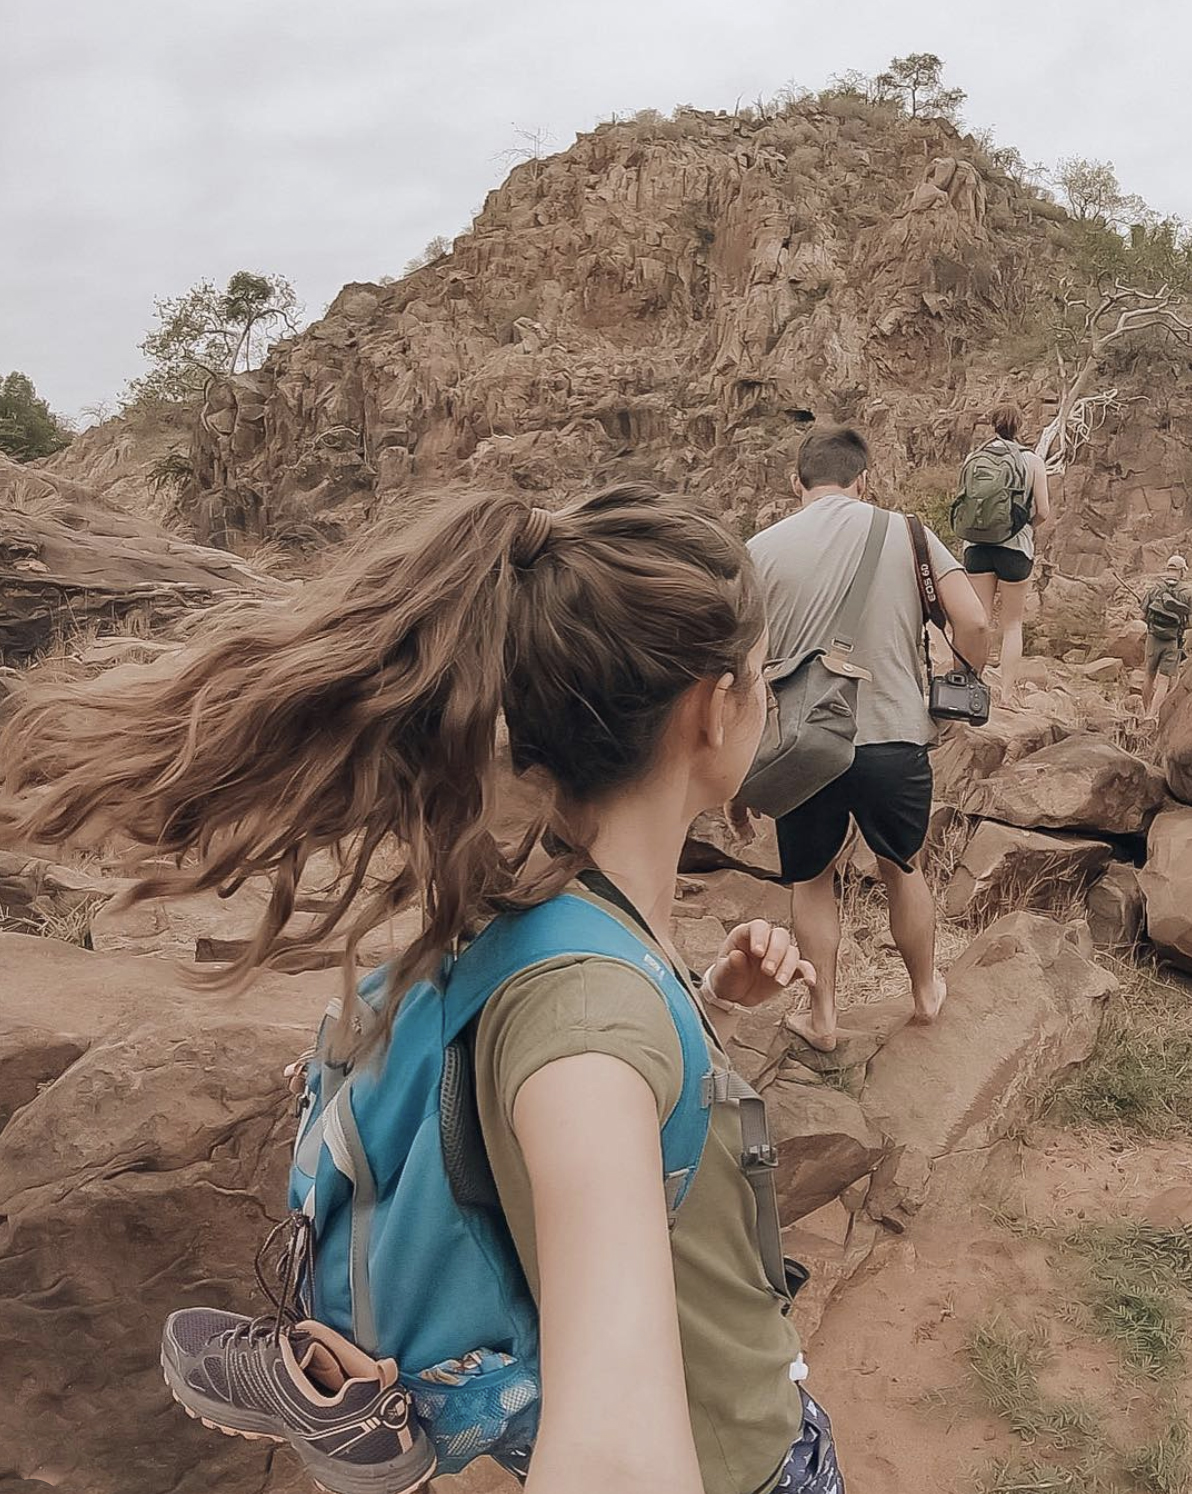 A walking safari is truly a remarkable experience, allowing you to absorb the sights, sounds and smells of the bush in a truly unique way. We love this snap from @sarahs.trek from her 5-hour walking safari through Lanner Gorge.